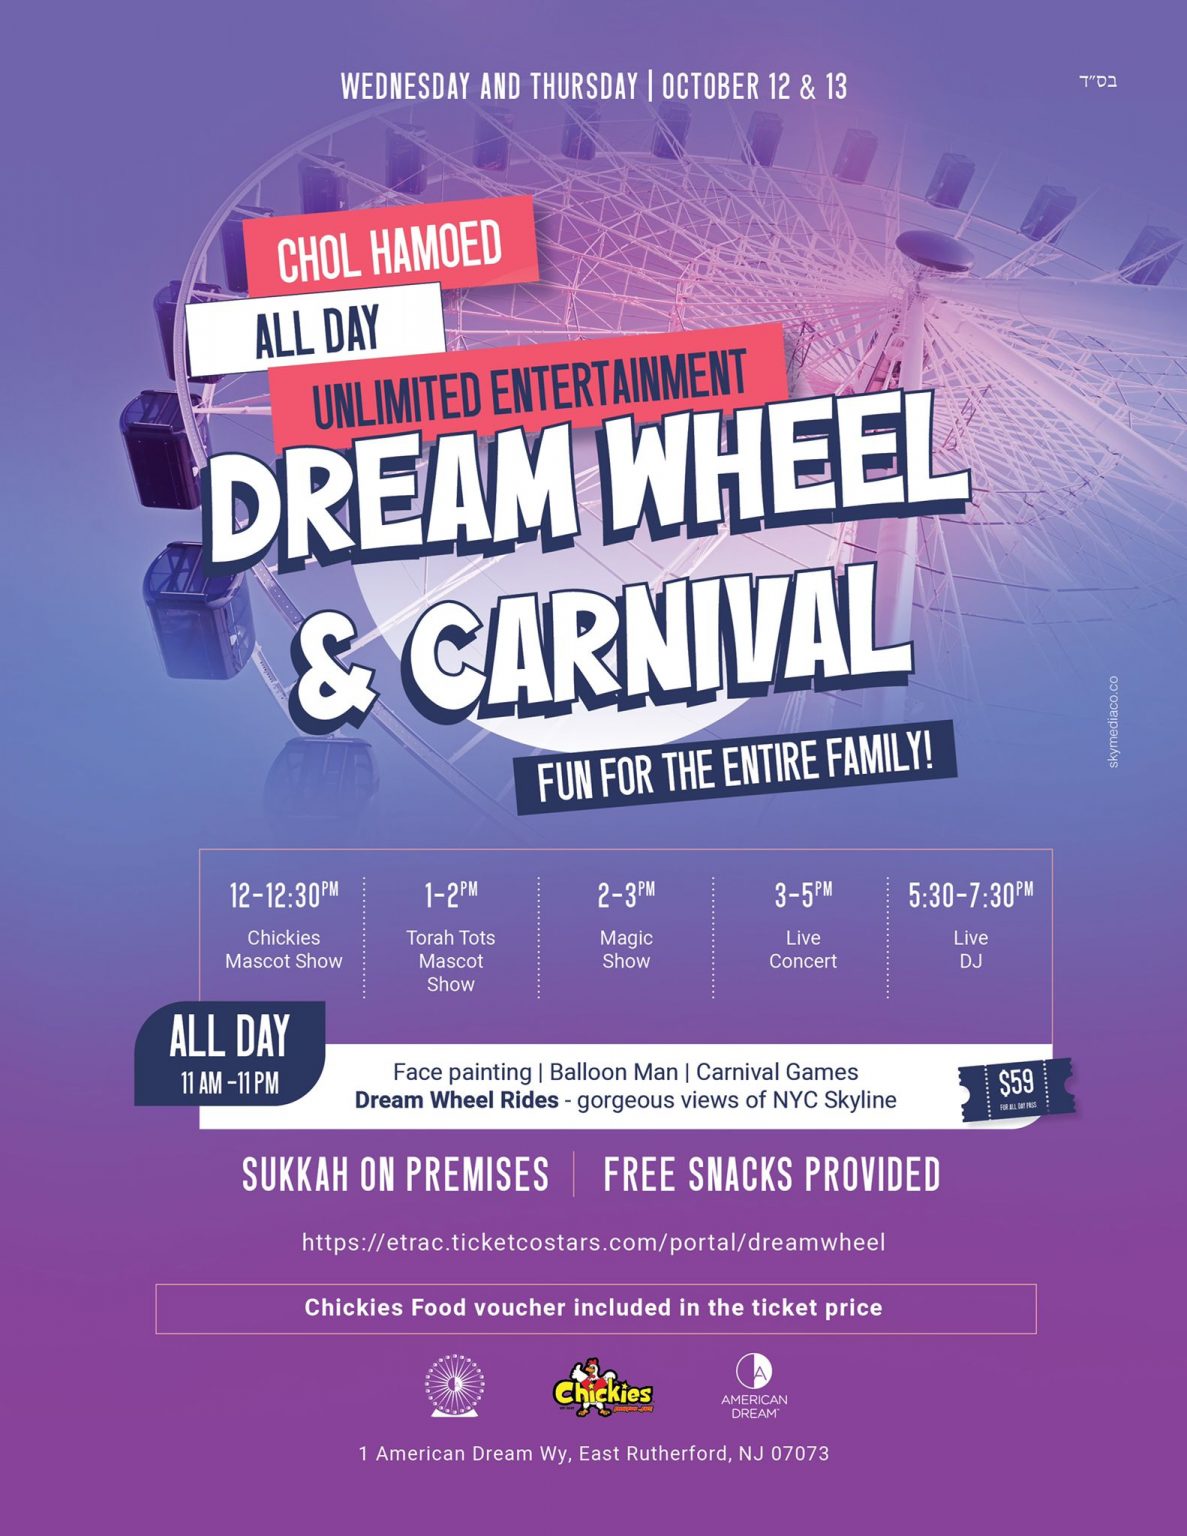 All day, unlimited Chol Hamoed fun at American Dream! The Lakewood Scoop